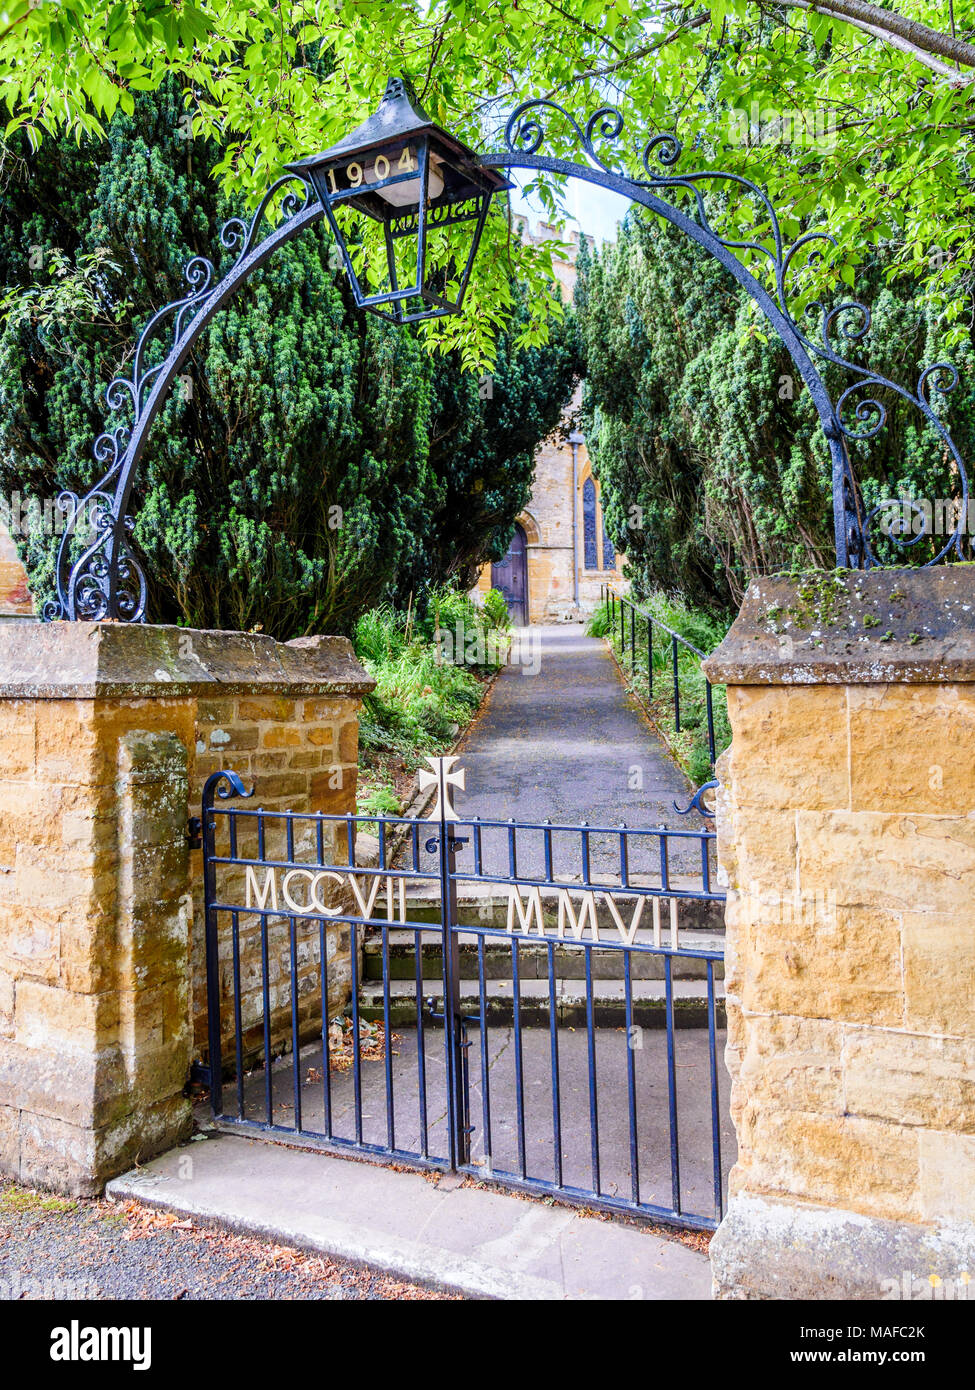 Day view entrance gates to typical Old English Church building. Stock Photo